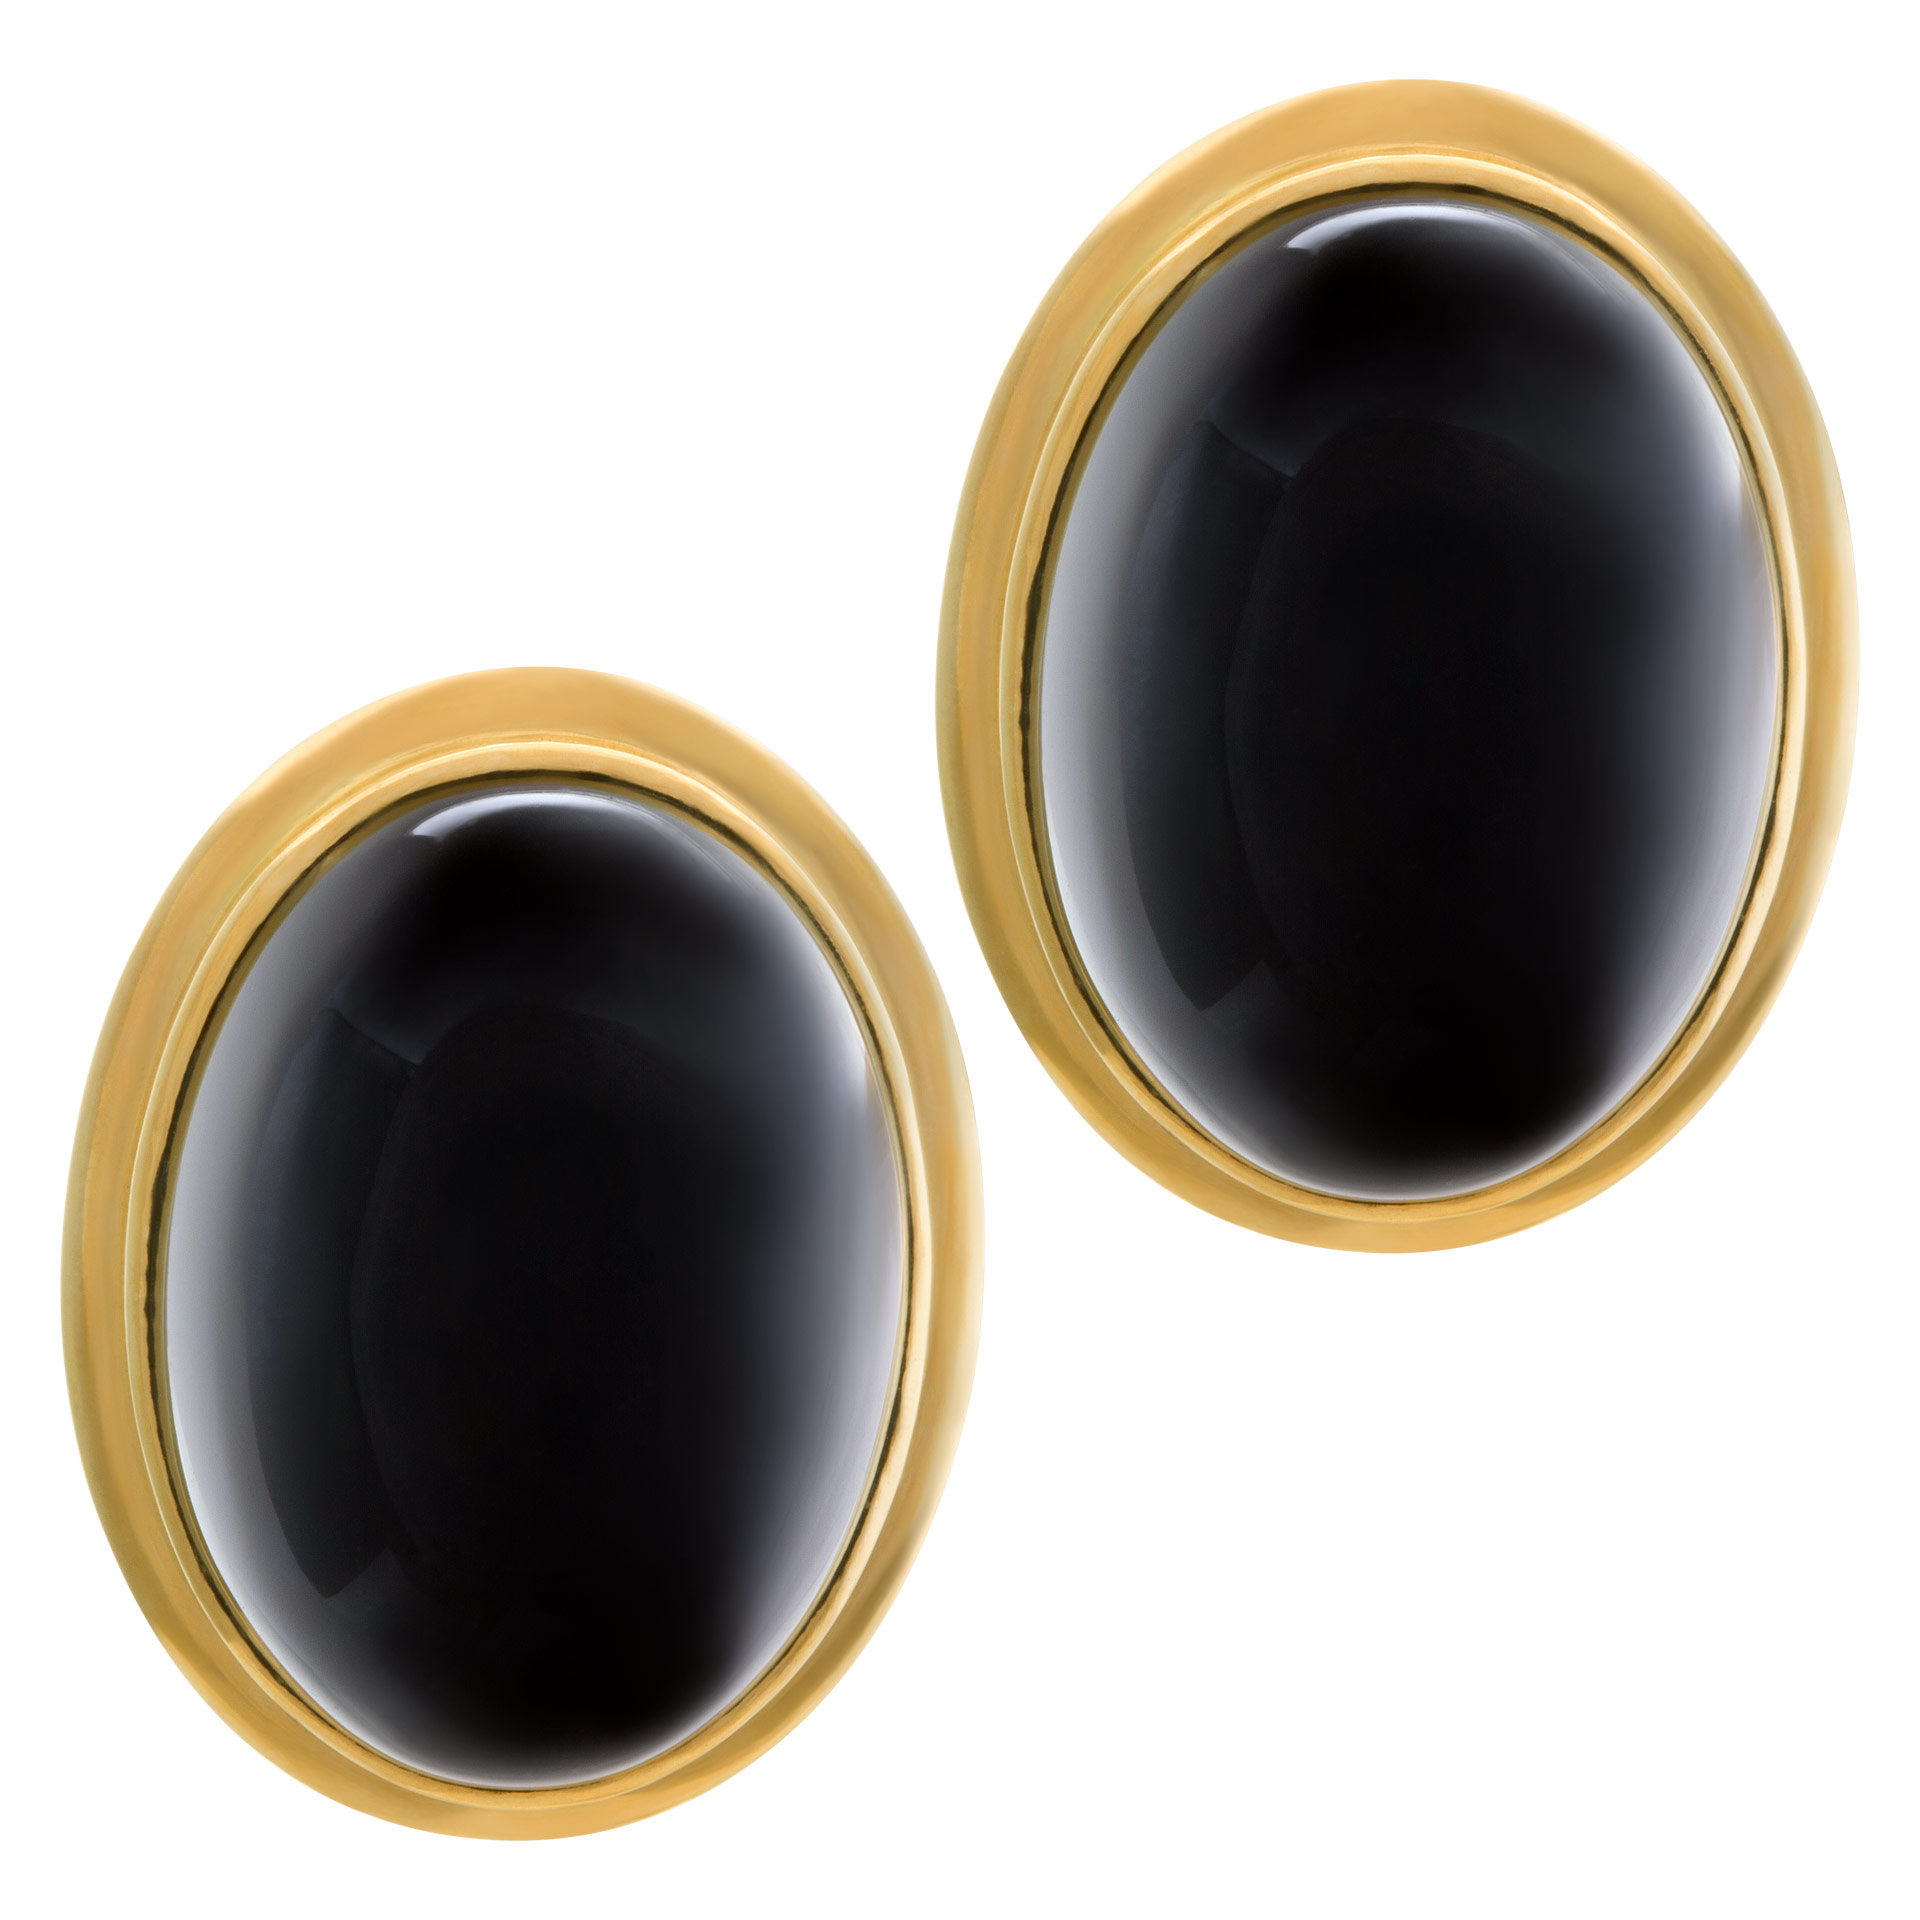 Large oval cabochon onyx earrings in 14k image 1